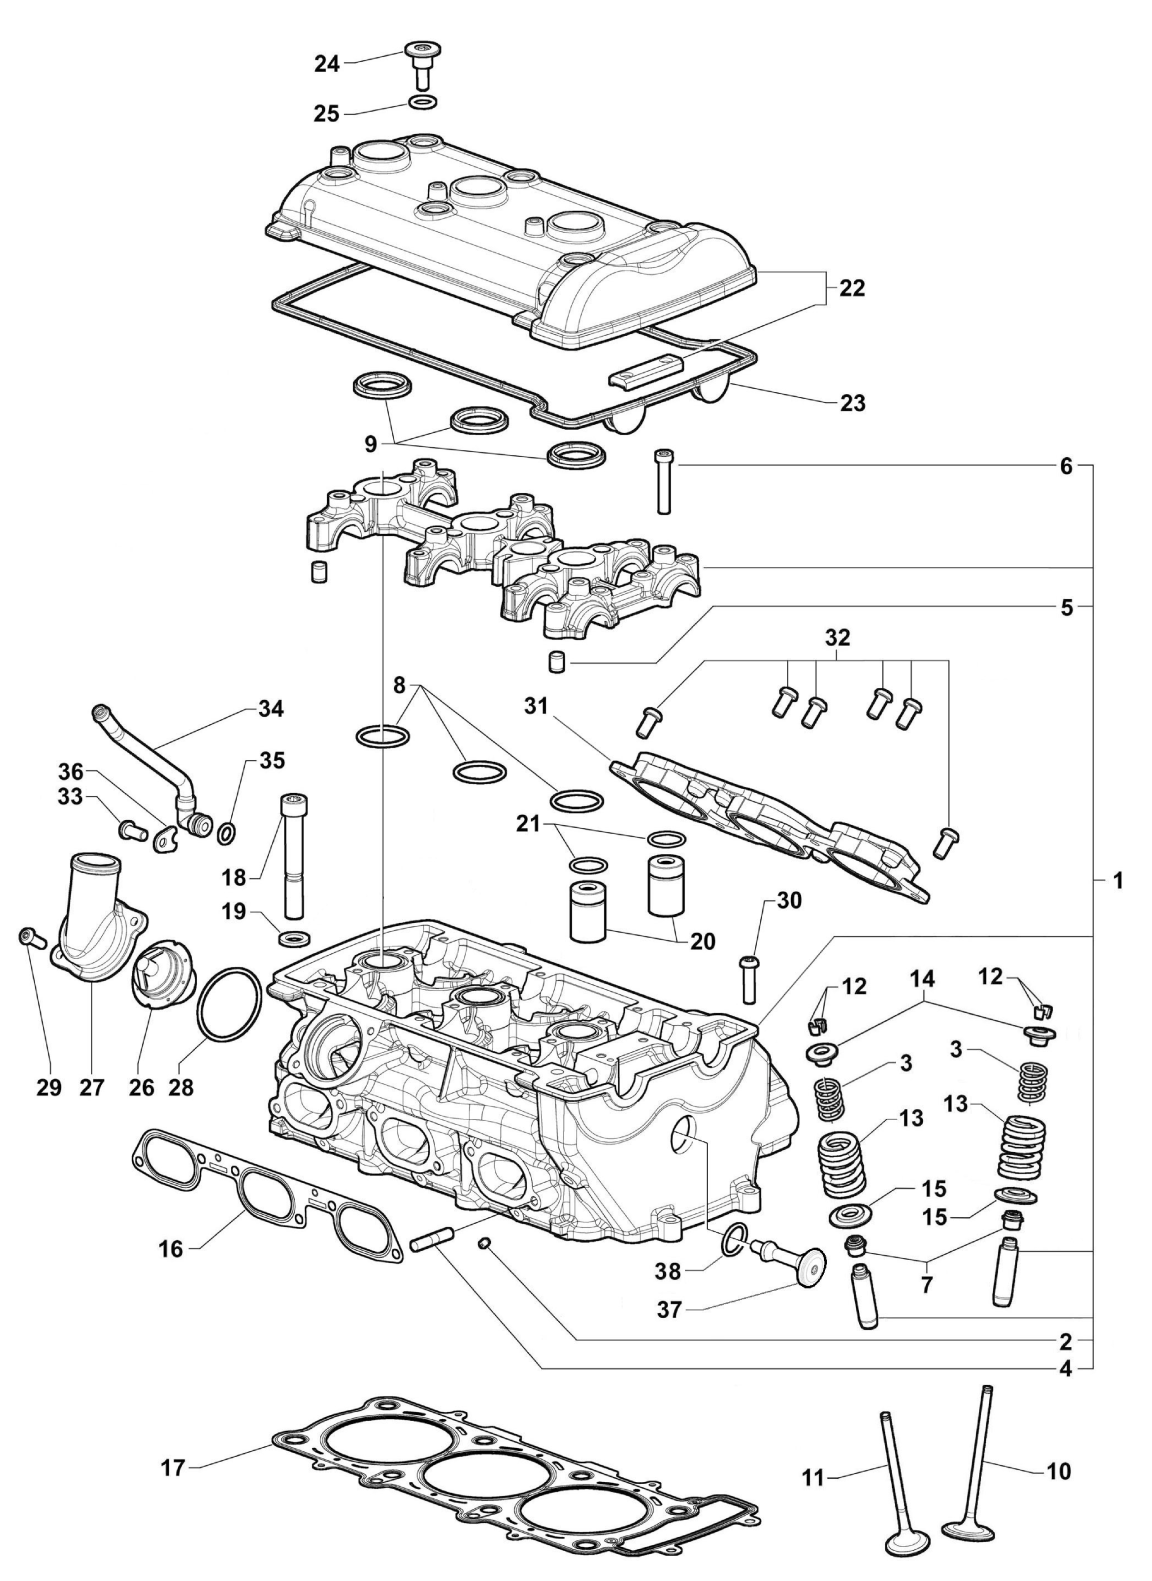 Cylinder Head Assembly


